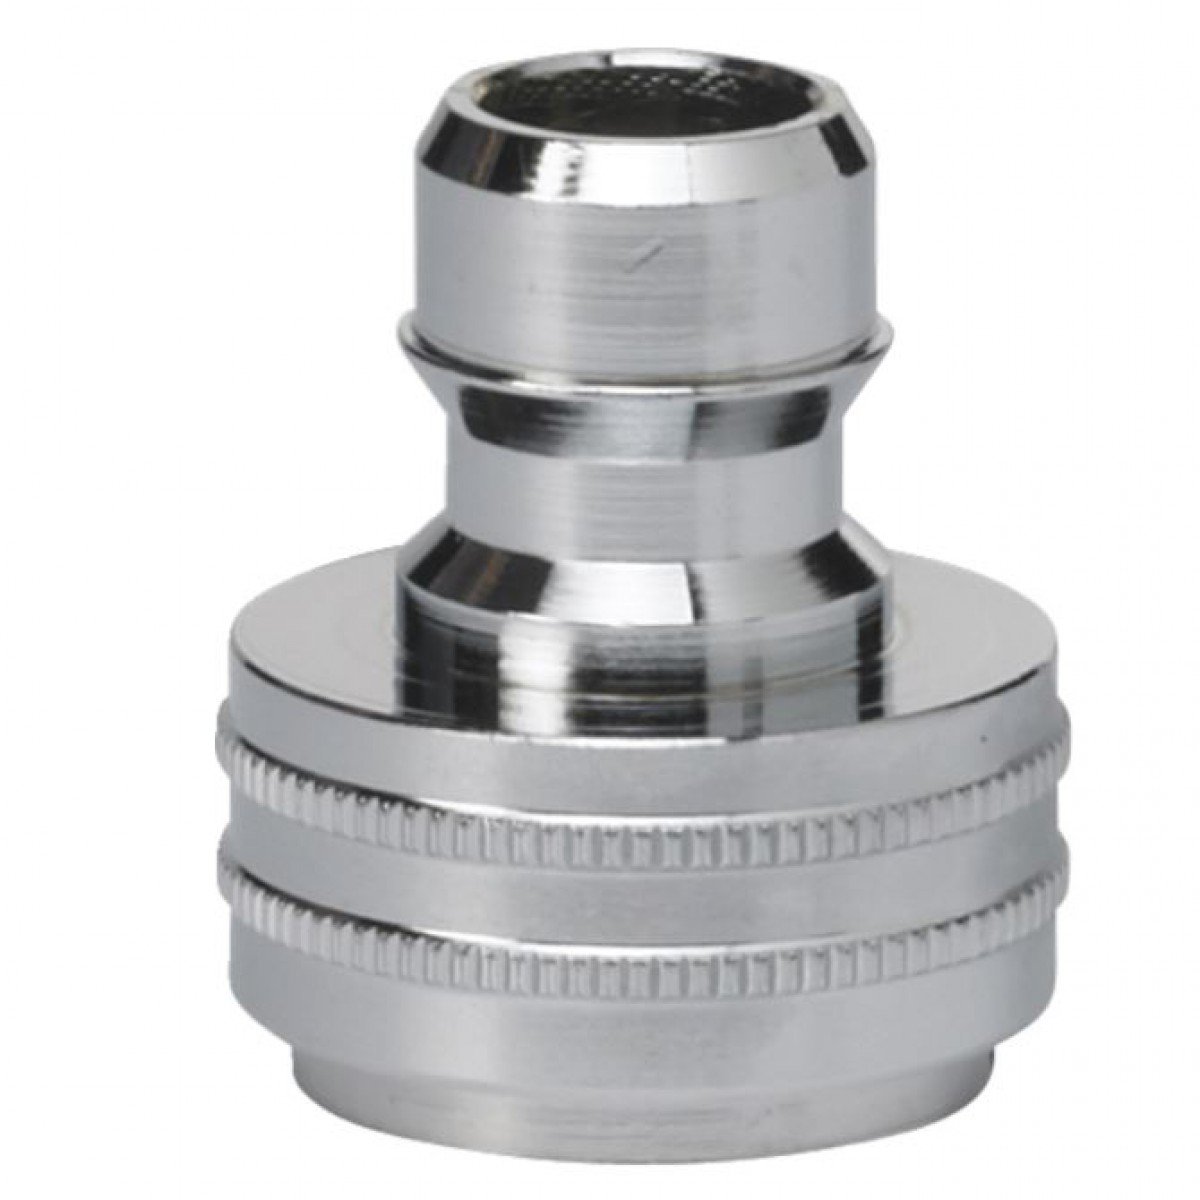 Tap coupling, male with reducer, 1/2"